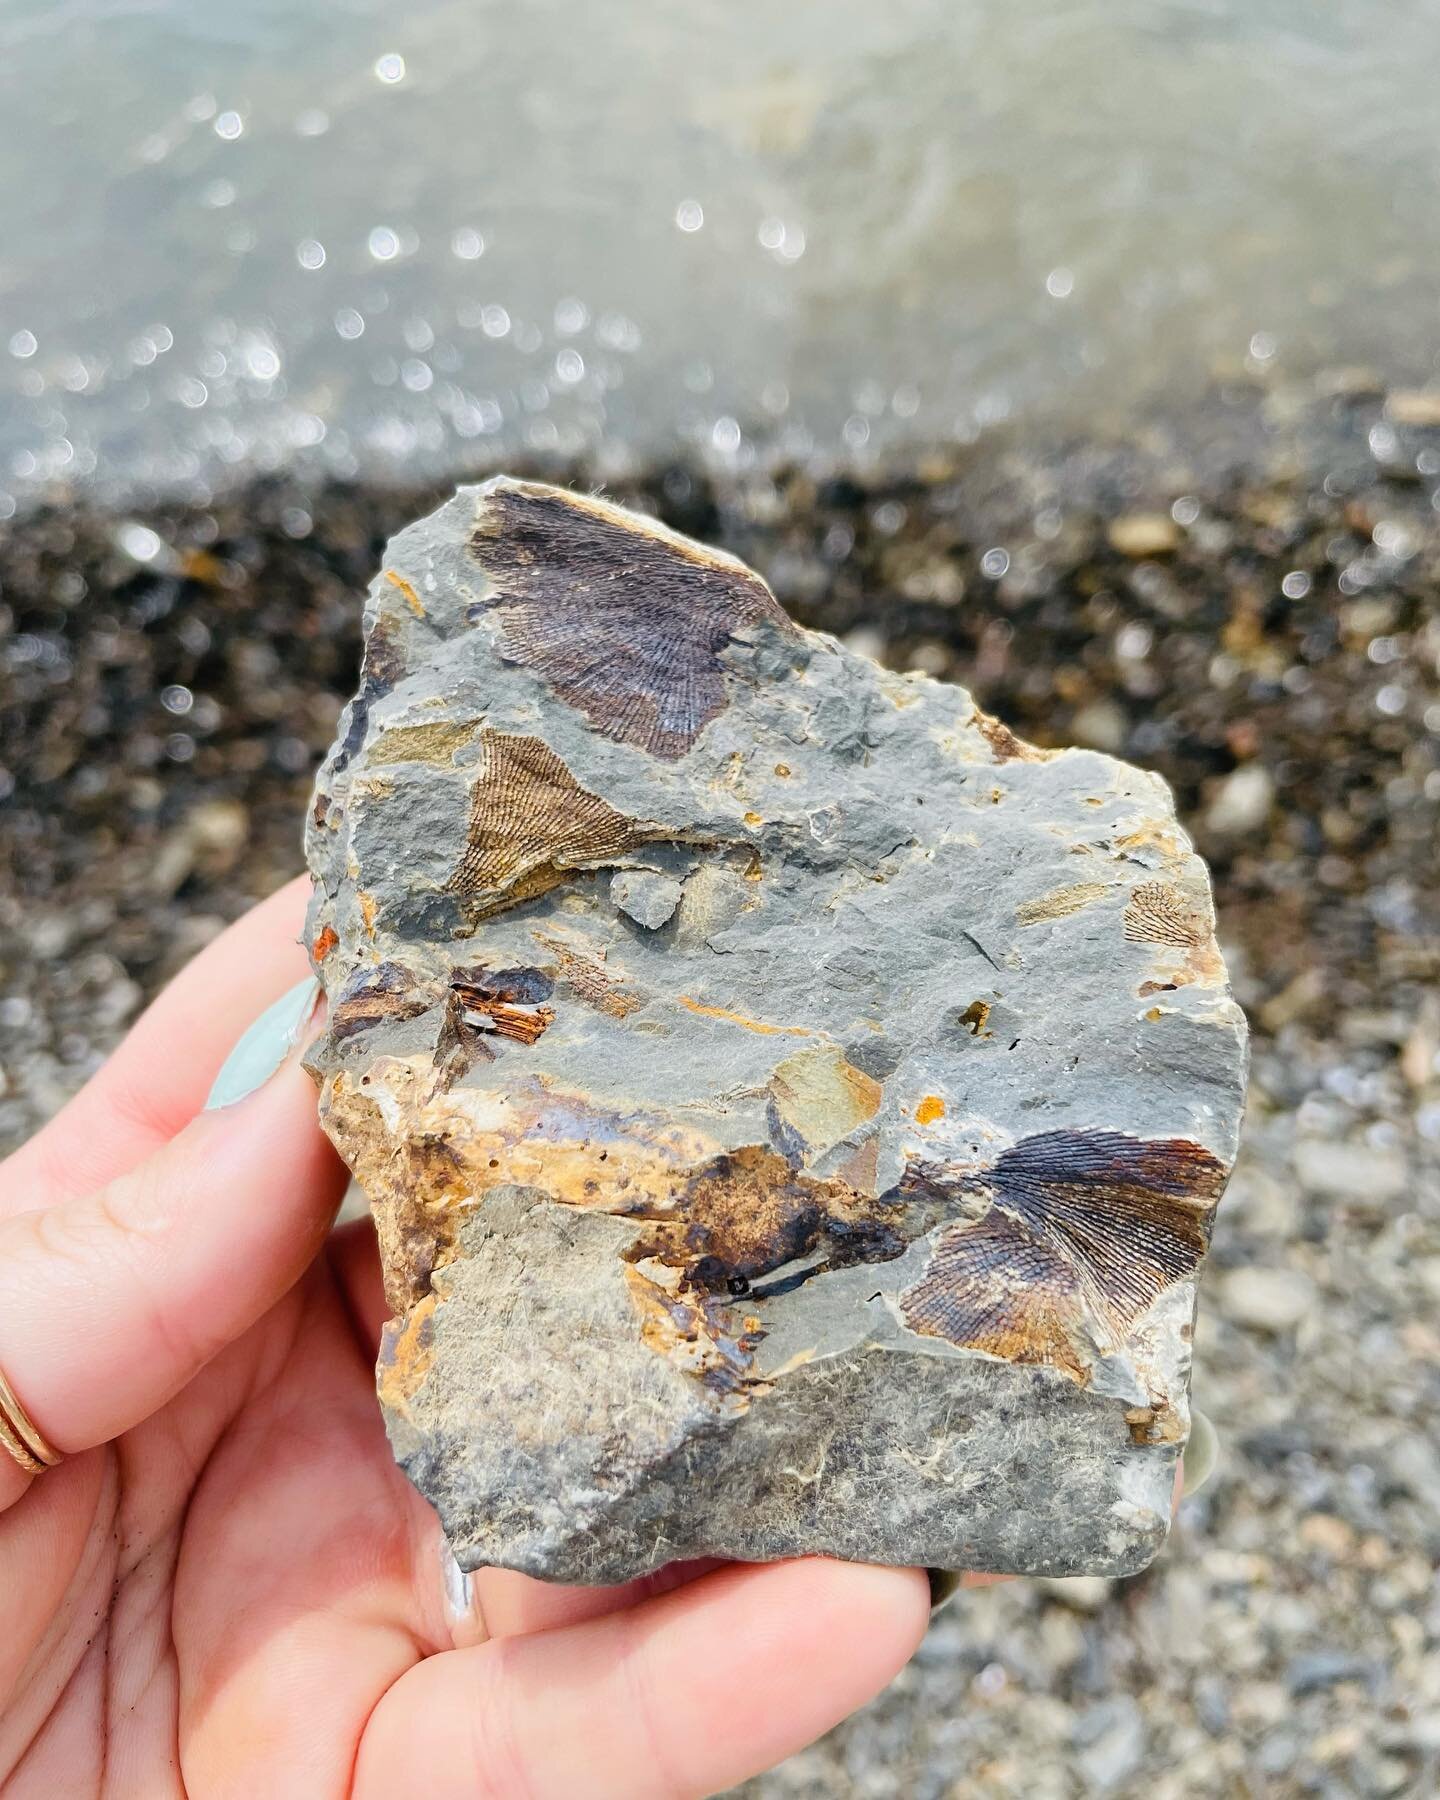 Sadly, like most places in the US the water levels at Beltsville State Park are exceptionally low, but it does make it a great time to find some fossils! Go check it out 🤓